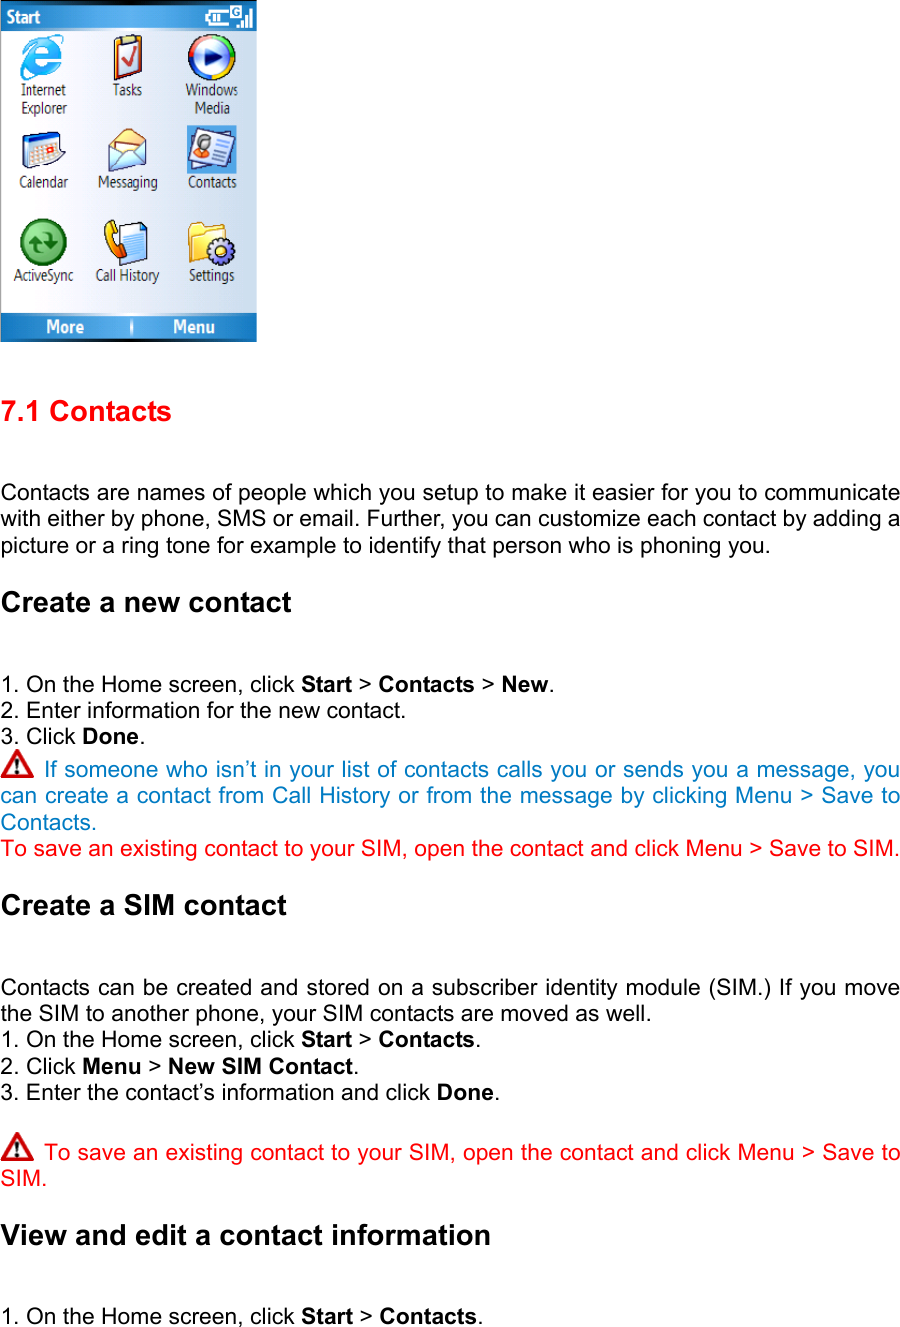   7.1 Contacts   Contacts are names of people which you setup to make it easier for you to communicate with either by phone, SMS or email. Further, you can customize each contact by adding a picture or a ring tone for example to identify that person who is phoning you. Create a new contact   1. On the Home screen, click Start &gt; Contacts &gt; New.  2. Enter information for the new contact.   3. Click Done.   If someone who isn’t in your list of contacts calls you or sends you a message, you can create a contact from Call History or from the message by clicking Menu &gt; Save to Contacts. To save an existing contact to your SIM, open the contact and click Menu &gt; Save to SIM. Create a SIM contact   Contacts can be created and stored on a subscriber identity module (SIM.) If you move the SIM to another phone, your SIM contacts are moved as well.   1. On the Home screen, click Start &gt; Contacts.  2. Click Menu &gt; New SIM Contact.  3. Enter the contact’s information and click Done.    To save an existing contact to your SIM, open the contact and click Menu &gt; Save to SIM. View and edit a contact information   1. On the Home screen, click Start &gt; Contacts.  